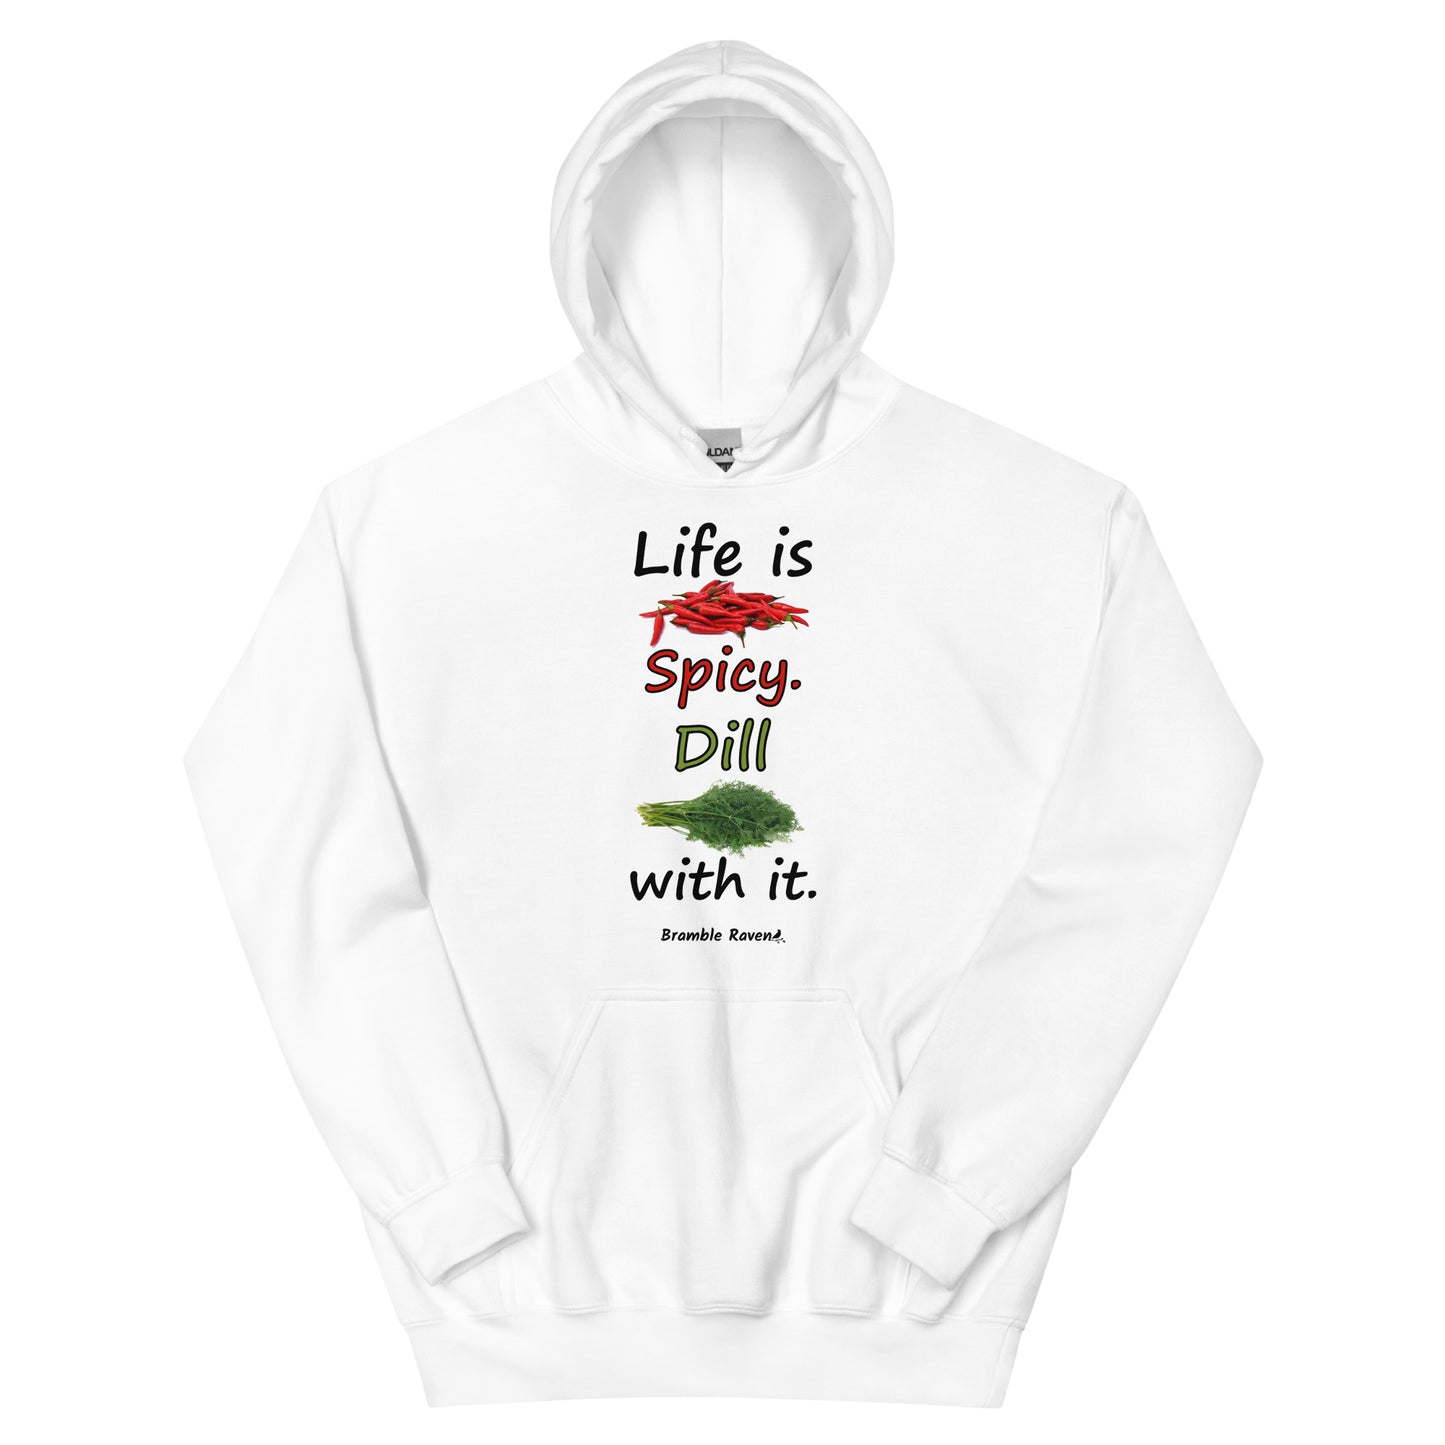 White colored unisex heavy blend hoodie.  Double lined hood, matching drawcord, front pouch pocket. Rib knit cuffs and waistband. Features text and image: Life is spicy. Dill with it. 